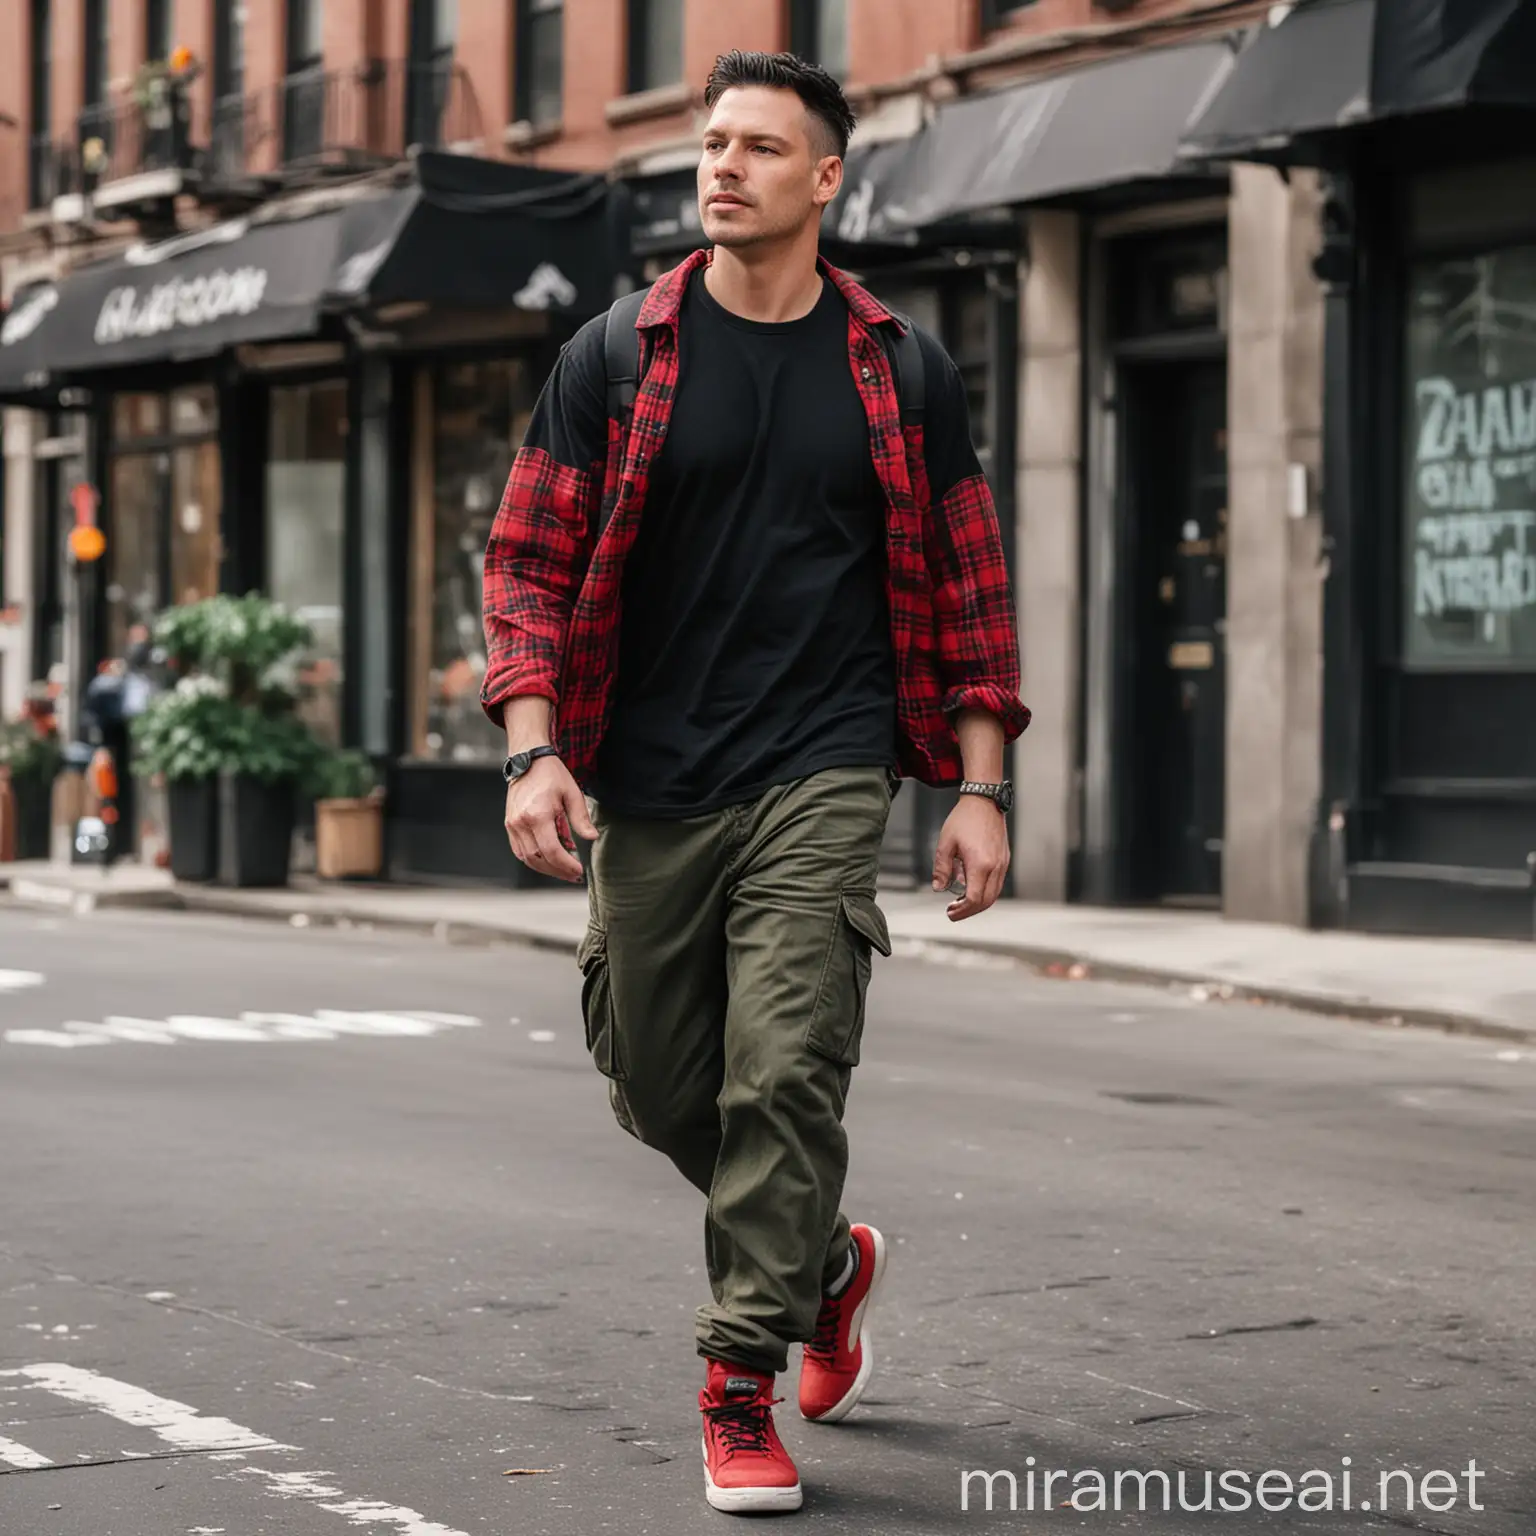 "A handsome white man with short black hair, clean-shaven face, without mustache and beard, casually walks down the street in New York. He is wearing a black T-shirt and a red flannel shirt, paired with cargo pants and Air Jordan shoes."